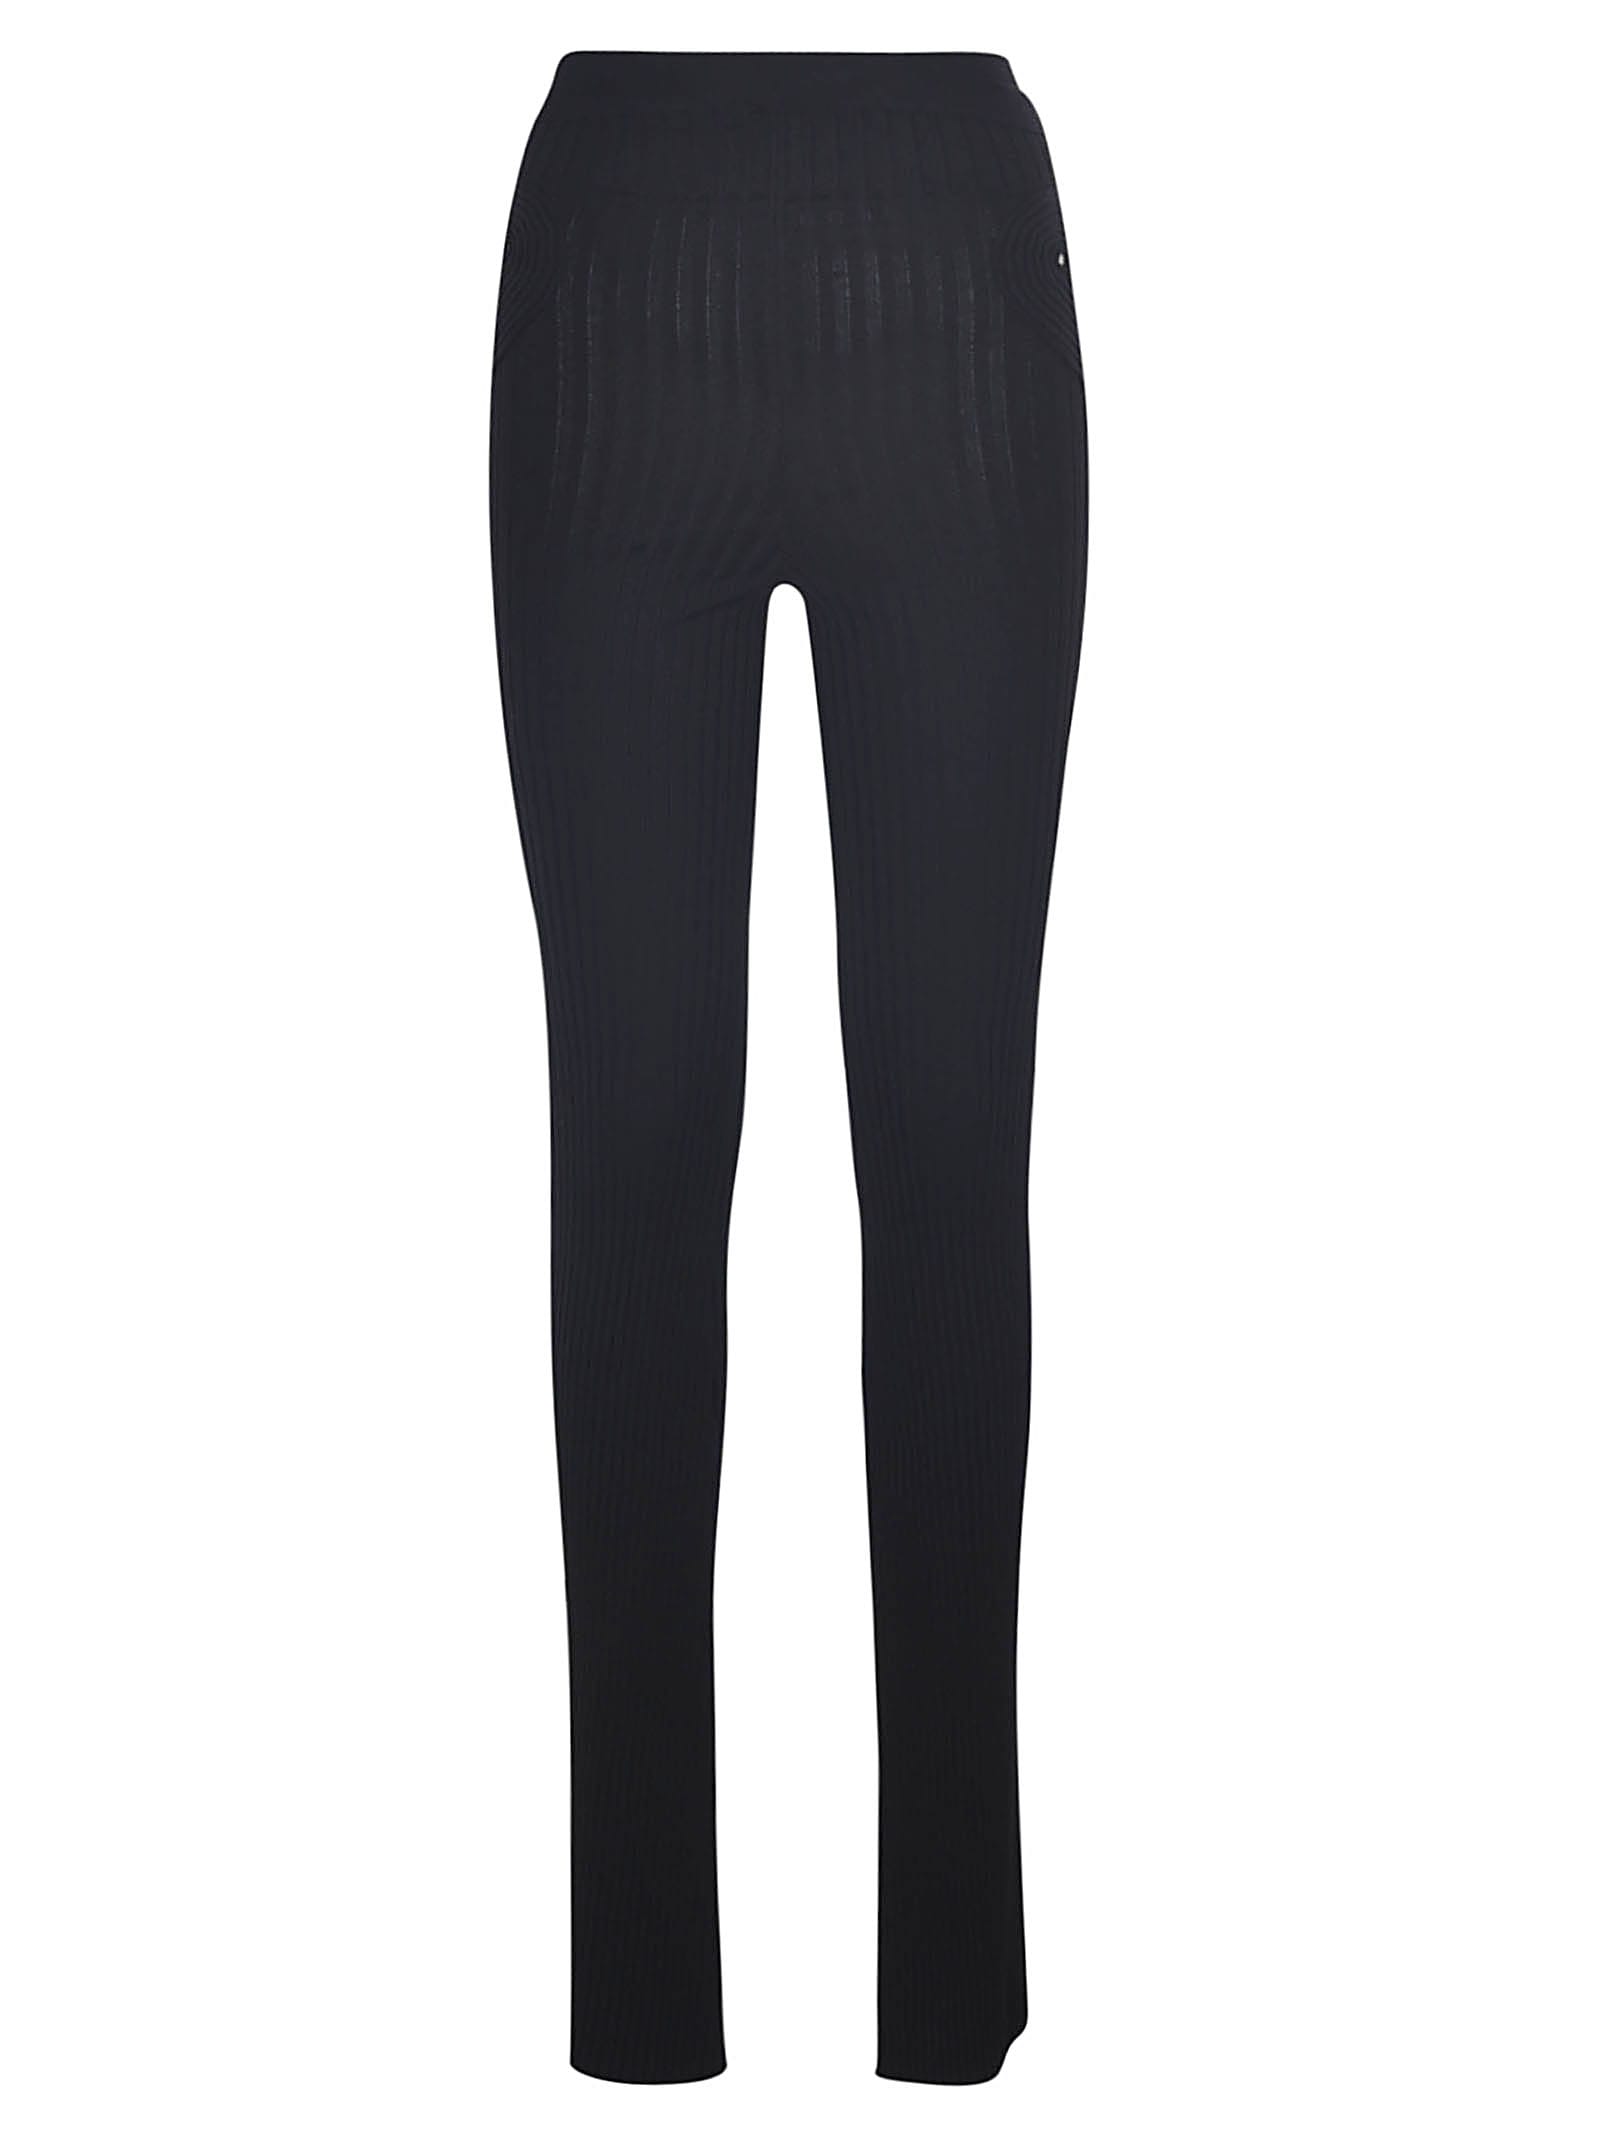 ANDREADAMO Ribbed Knit Flair Trousers